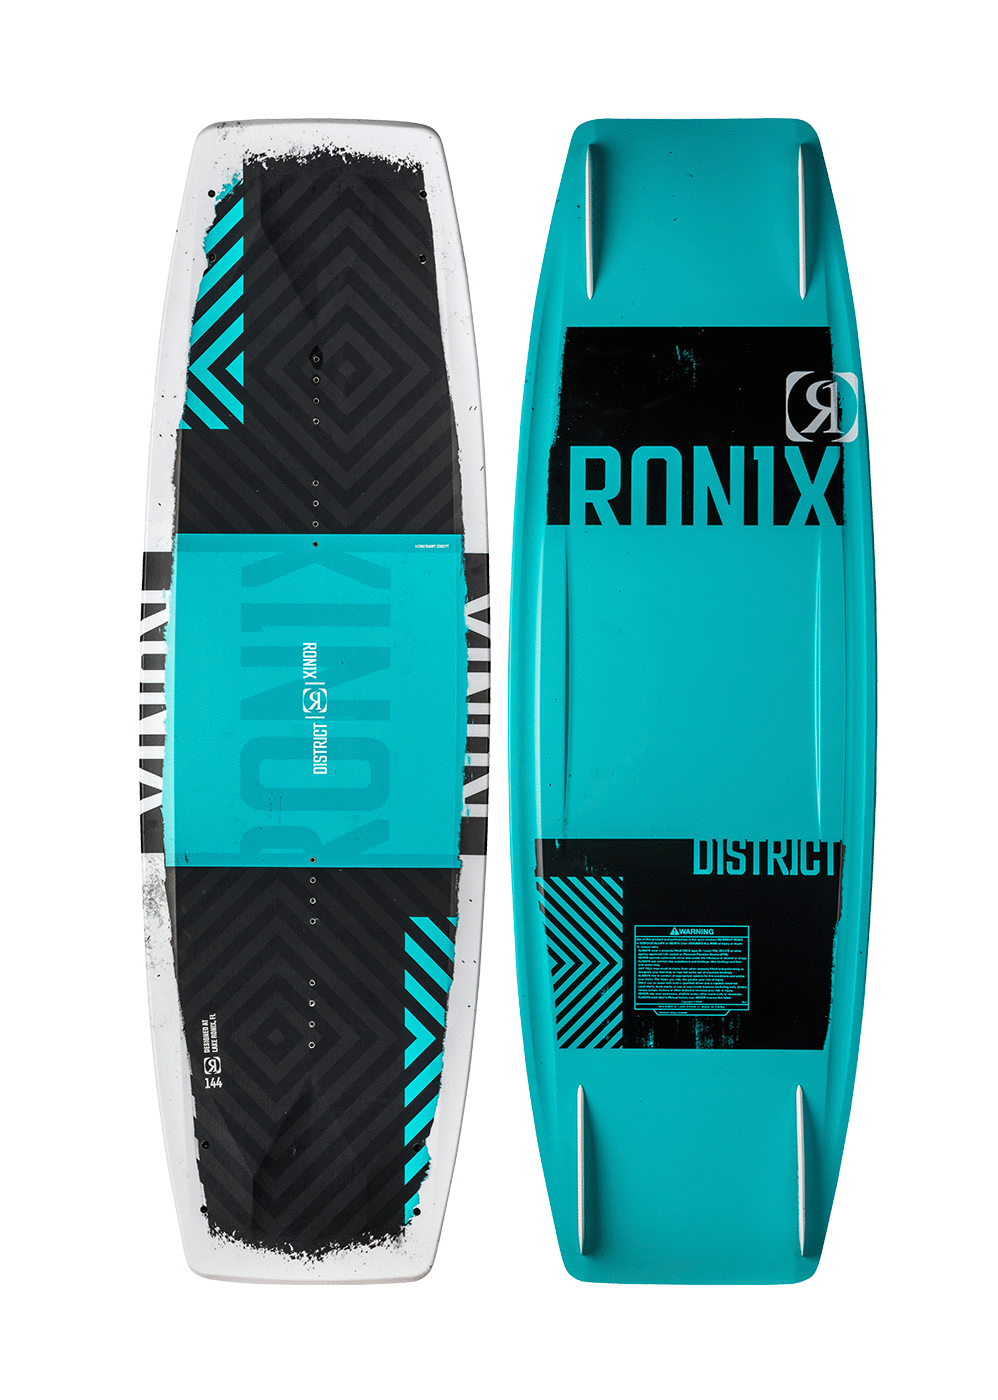 Ronix District w/ District Wakeboard Package